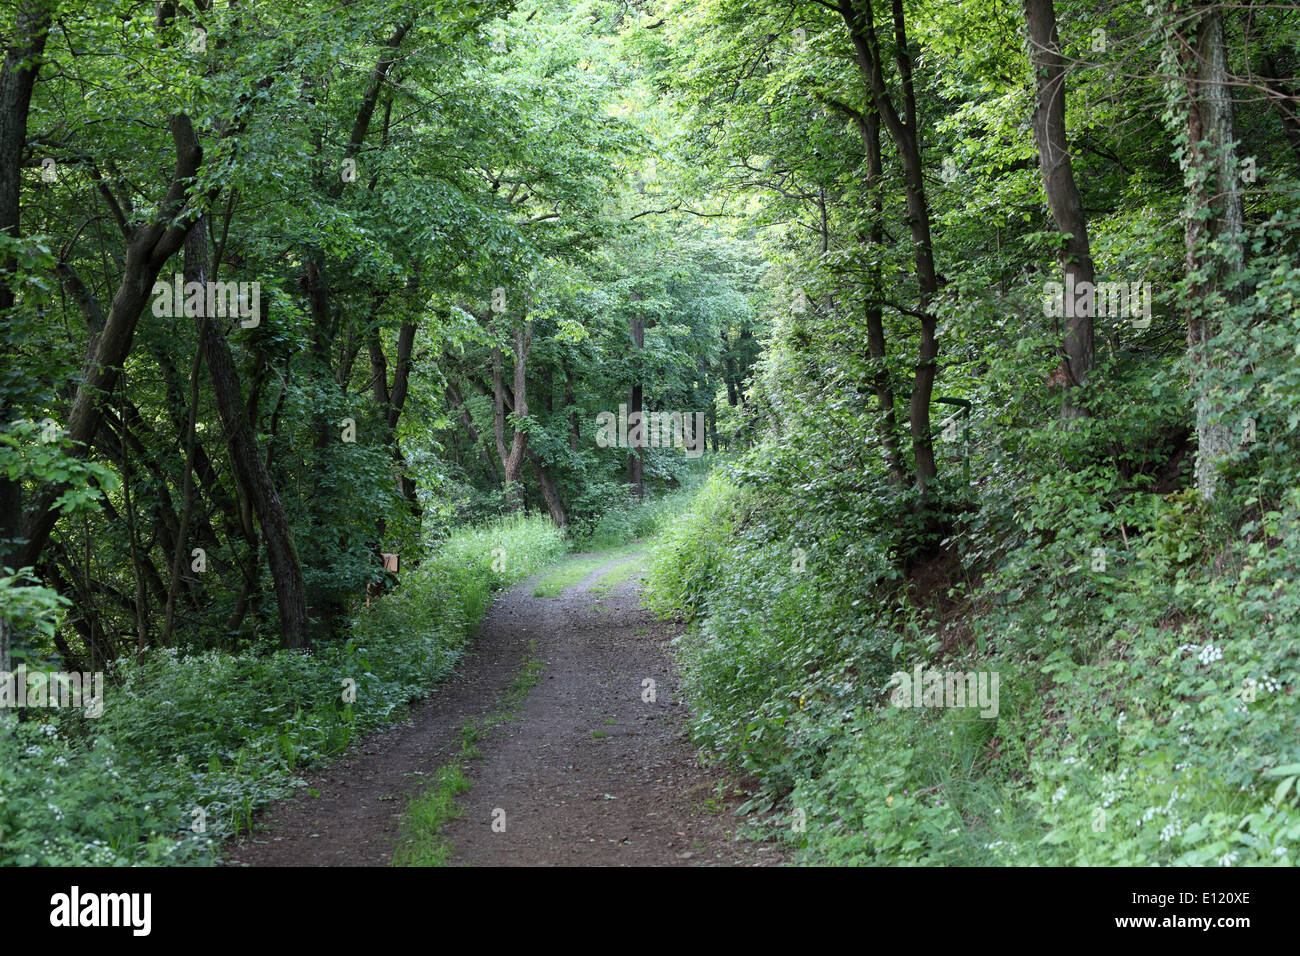 Road in the dark green forest Stock Photo